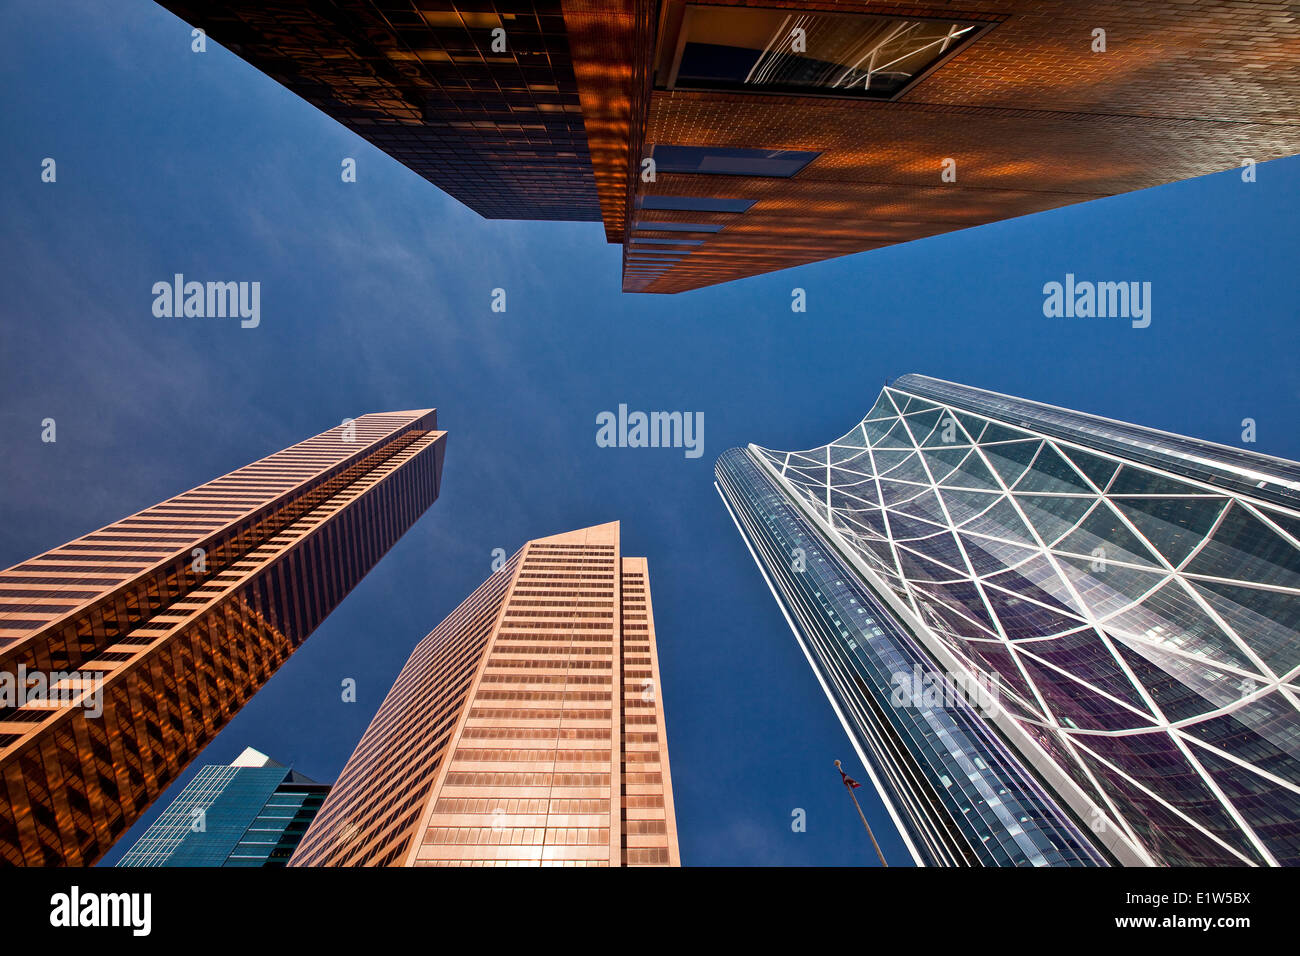 Bow Tower et Suncor Energy Centre, Calgary, AB, Canada. Banque D'Images